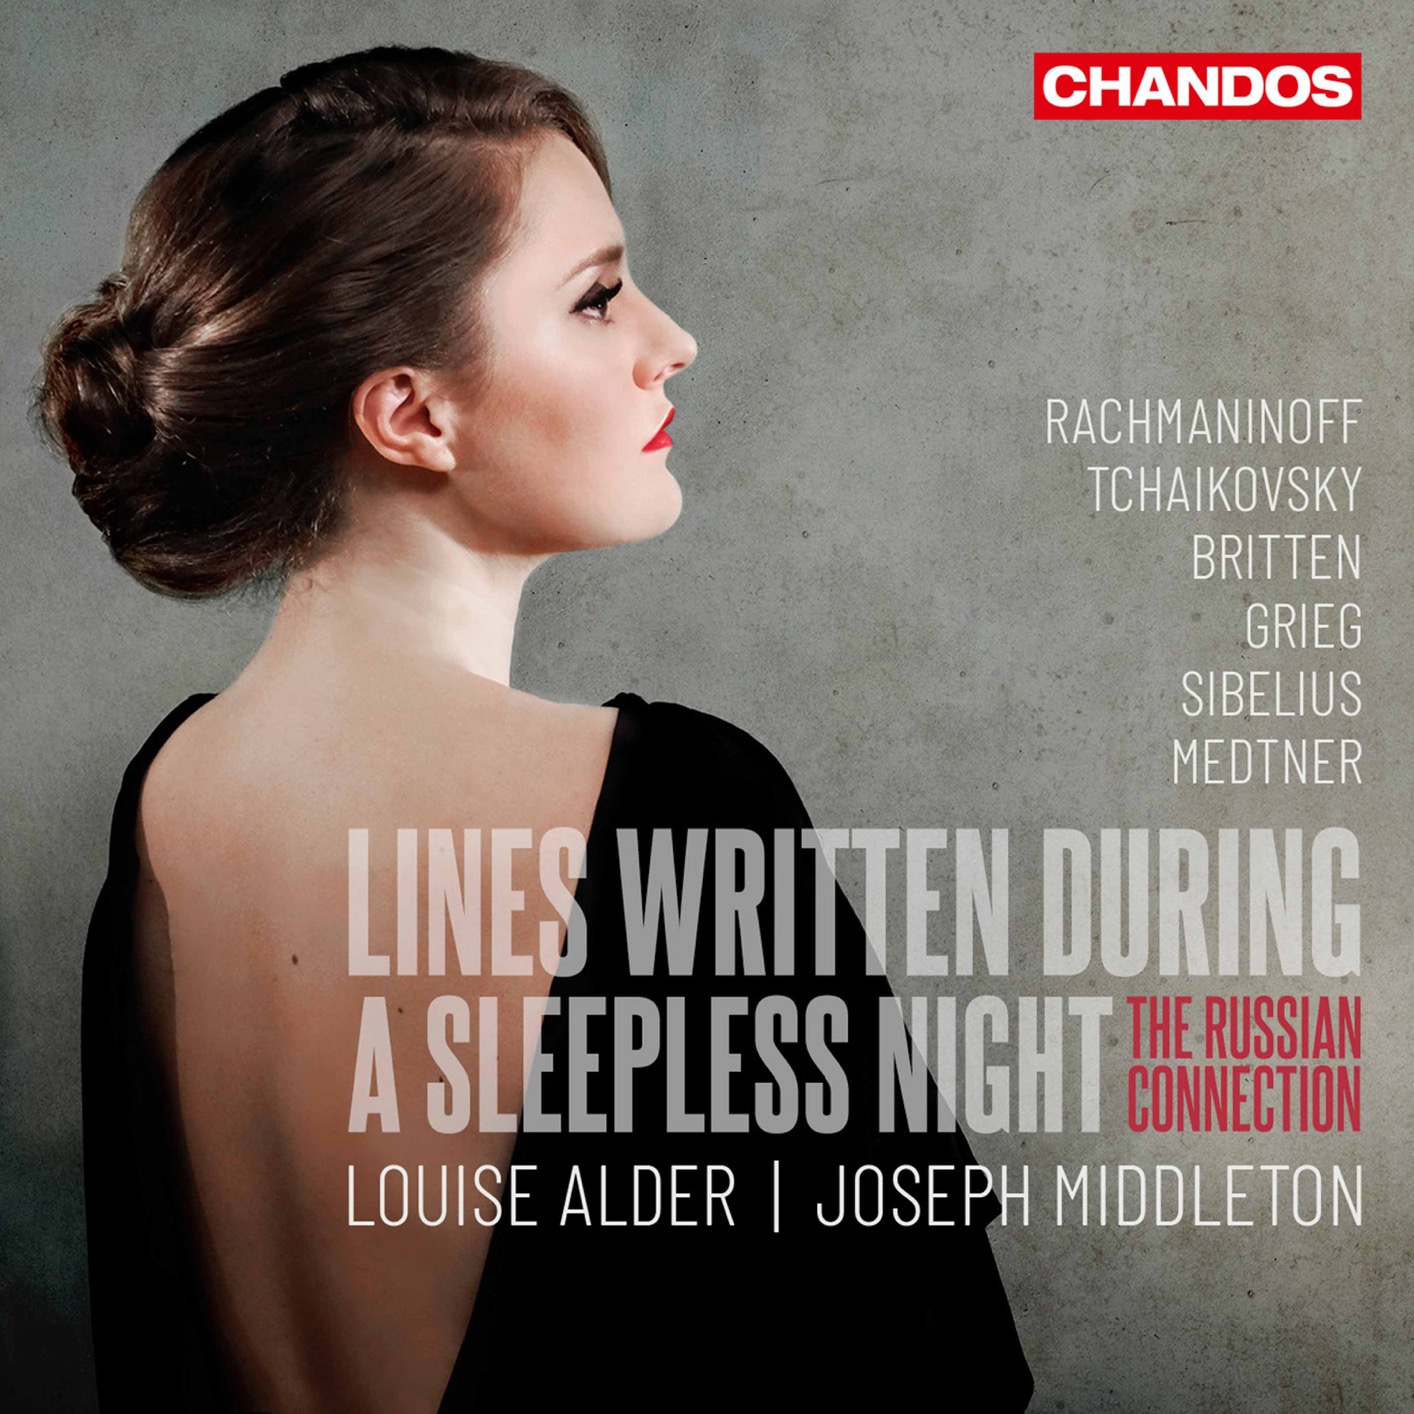 Joseph Middleton & Louise Alder - Lines Written During a Sleeplesss Night: The Russian Connection (2020) [FLAC 24bit/96kHz]